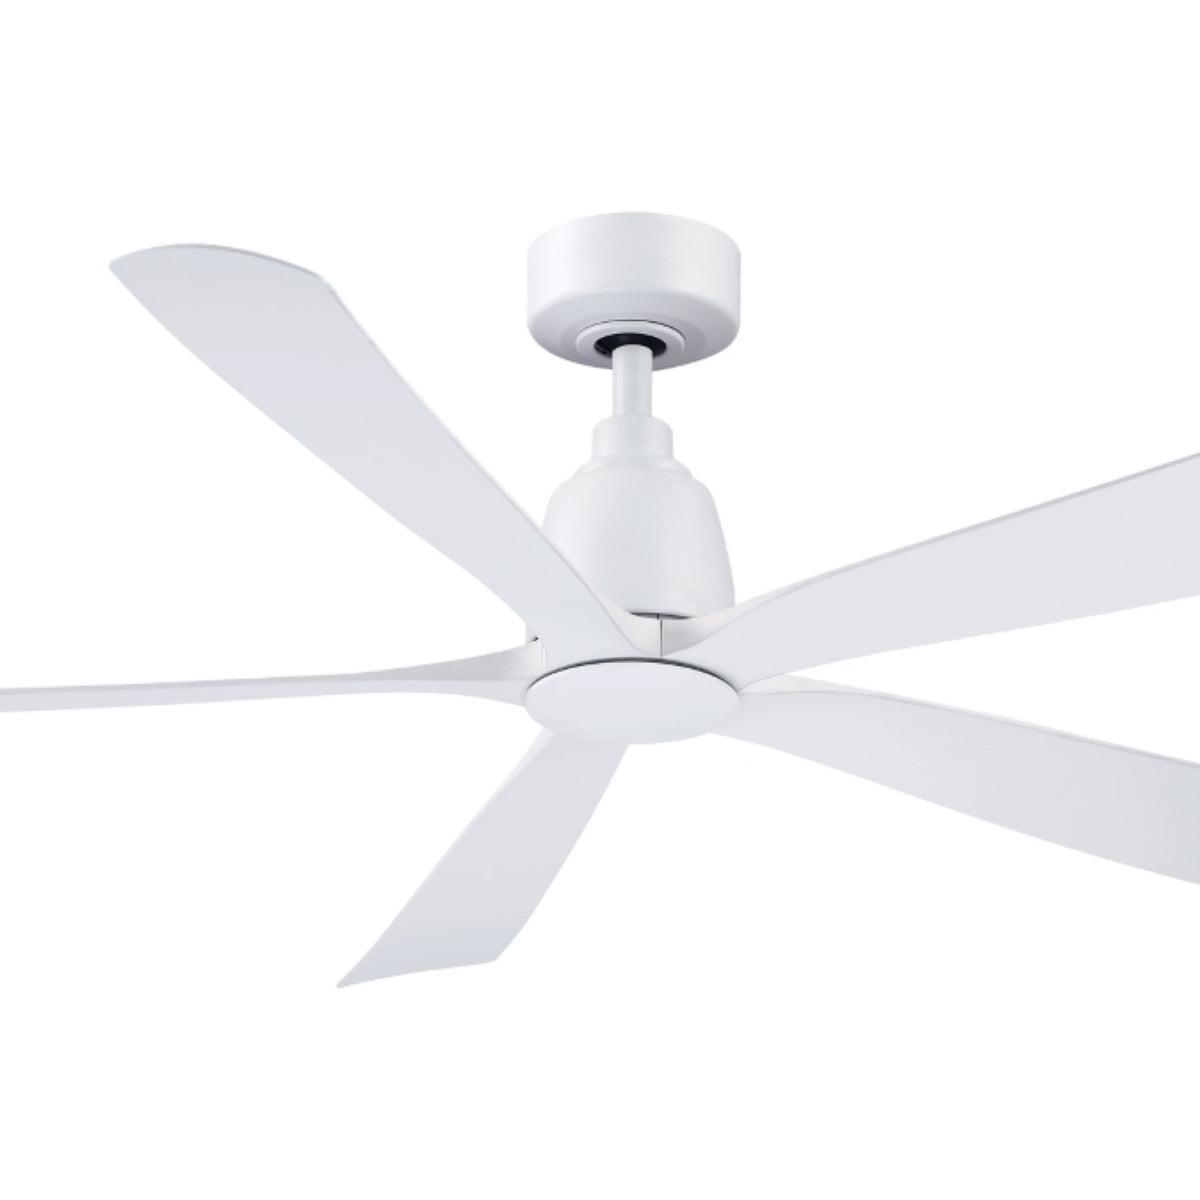 Kute5 52 Inch 5 Blades Indoor/Outdoor Ceiling Fan With Remote, Matte White Finish - Bees Lighting